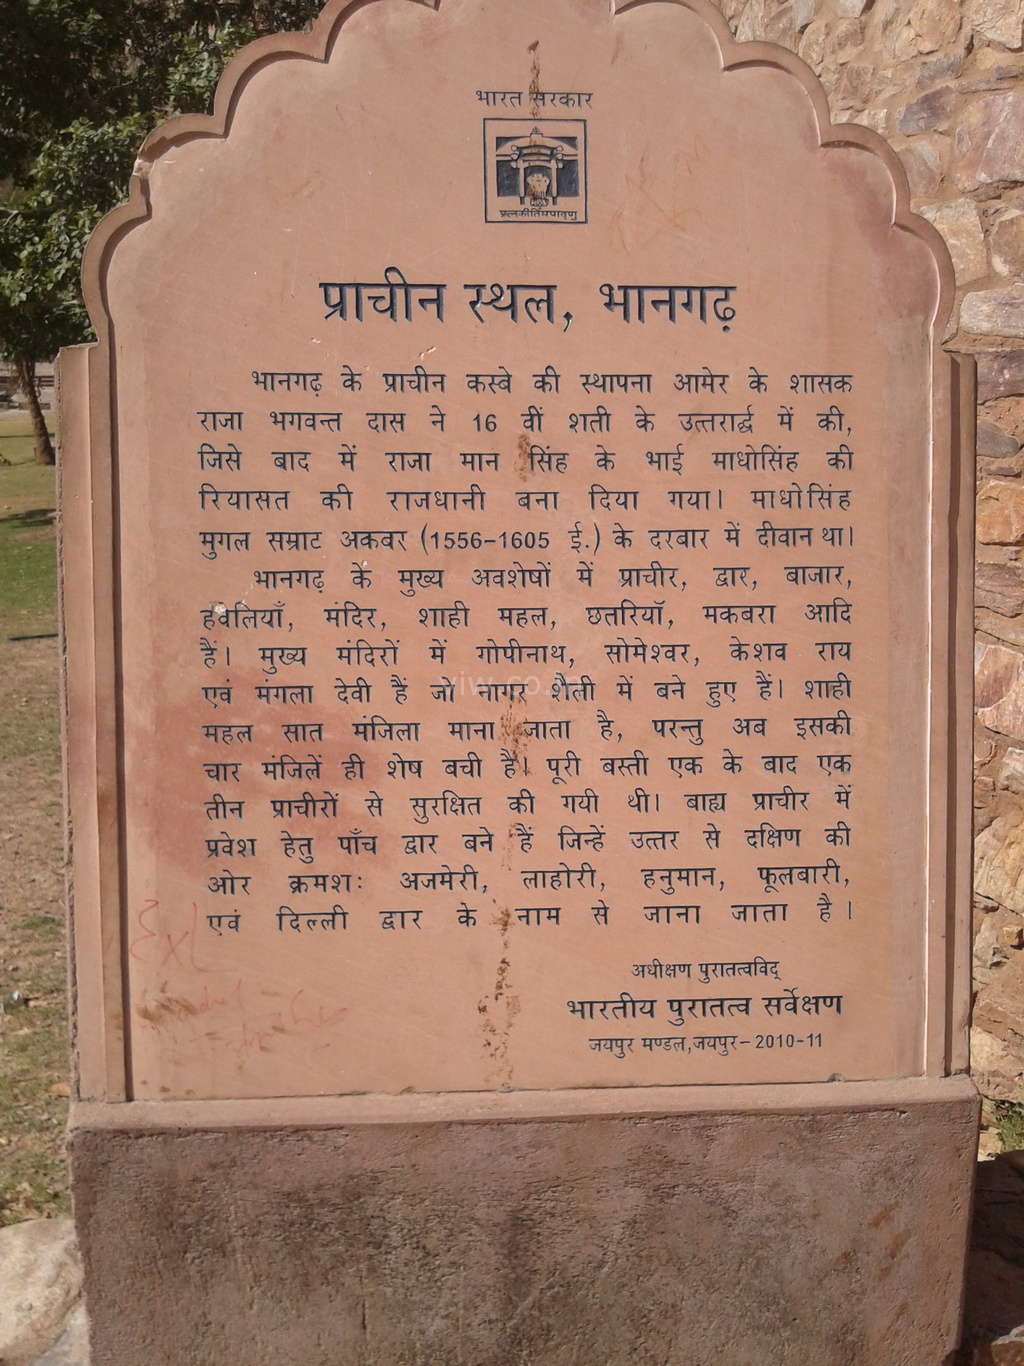 Description about the Bhangarh Fort